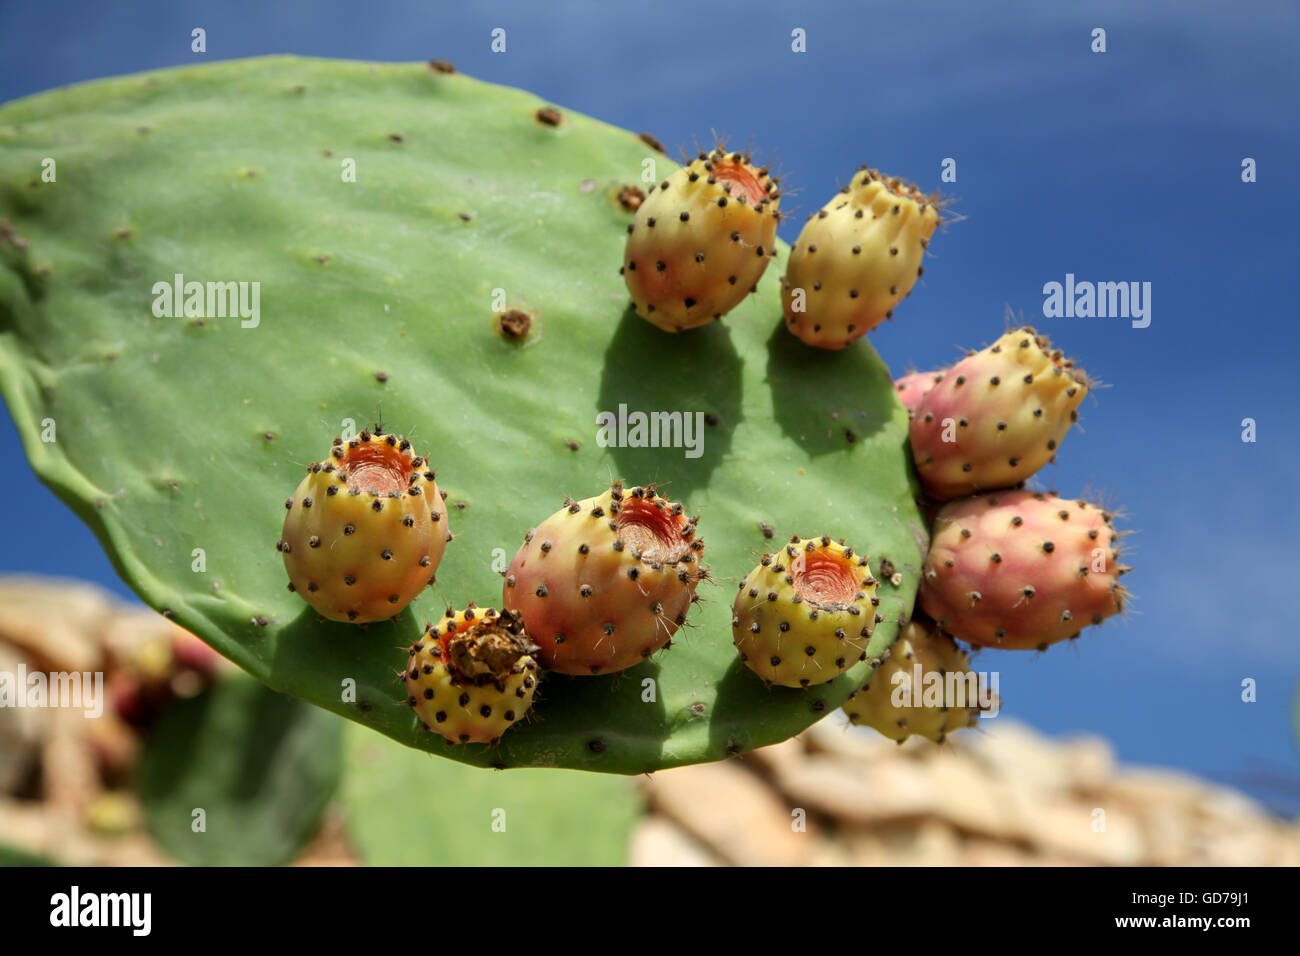 Several ripe, pink-blushed prickly pear fruits on a prickly pear leaf ready to be picked Stock Photo